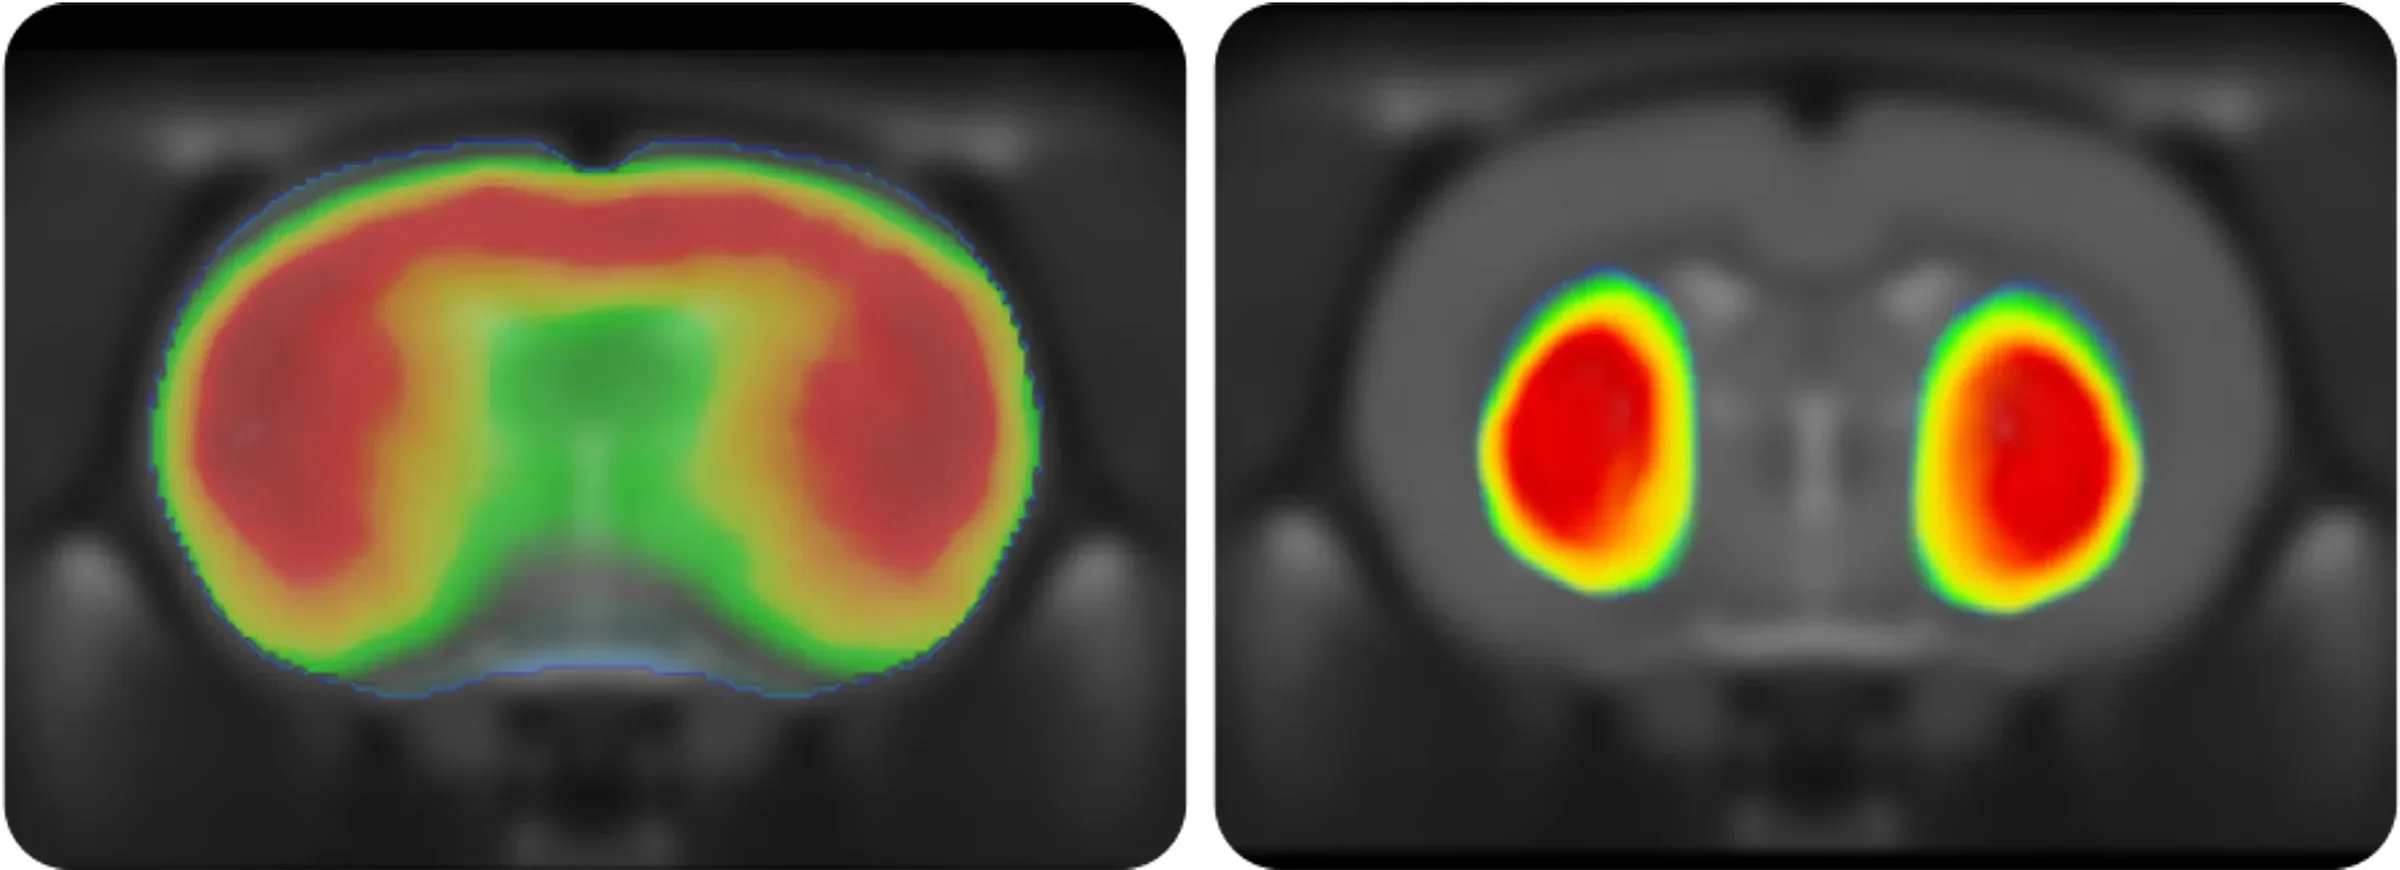 Two small square panels, each depicting what appears to be a Positron Emission Tomography (PET) scan, a type of imaging test that helps reveal how tissues and organs are functioning